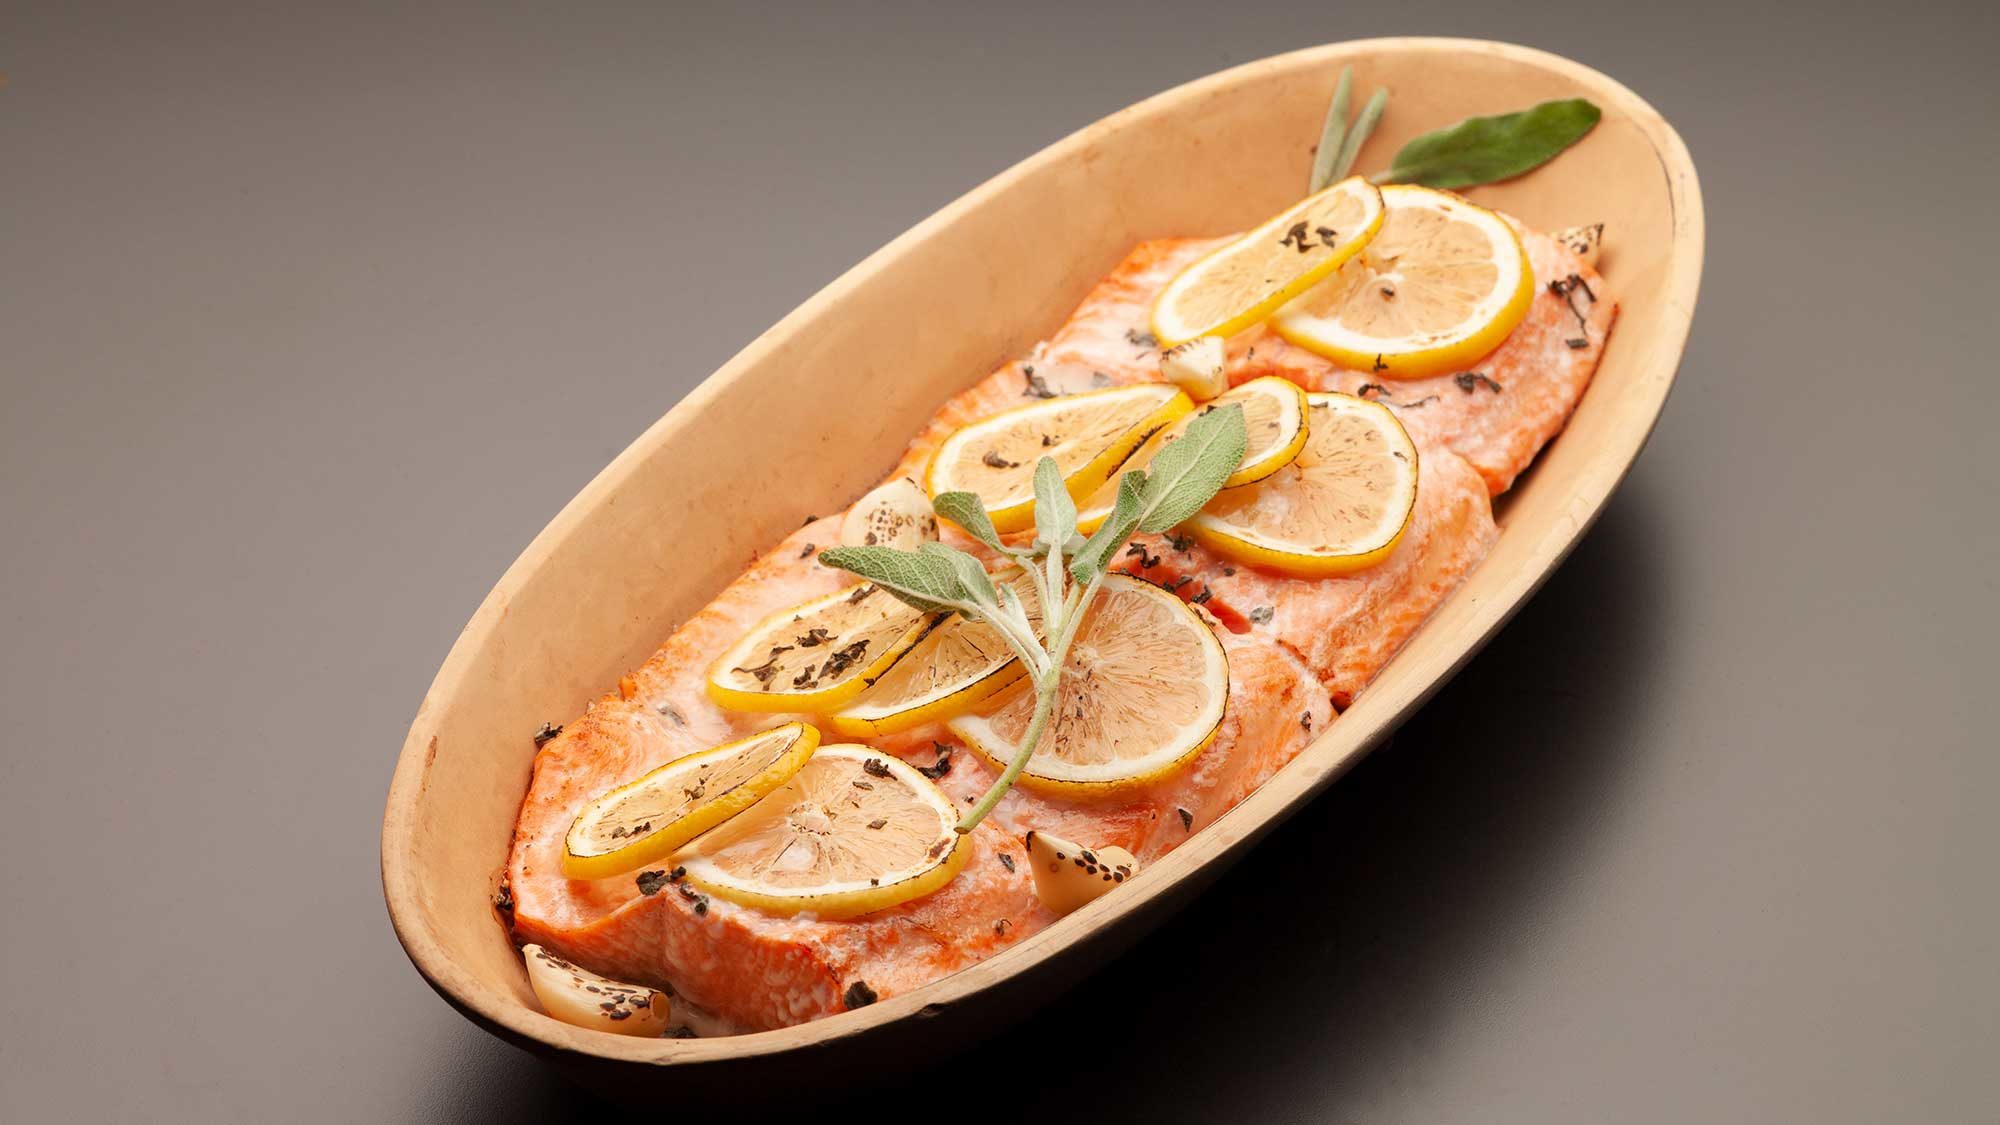 plated steelhead trout fillets with lemon sage butter